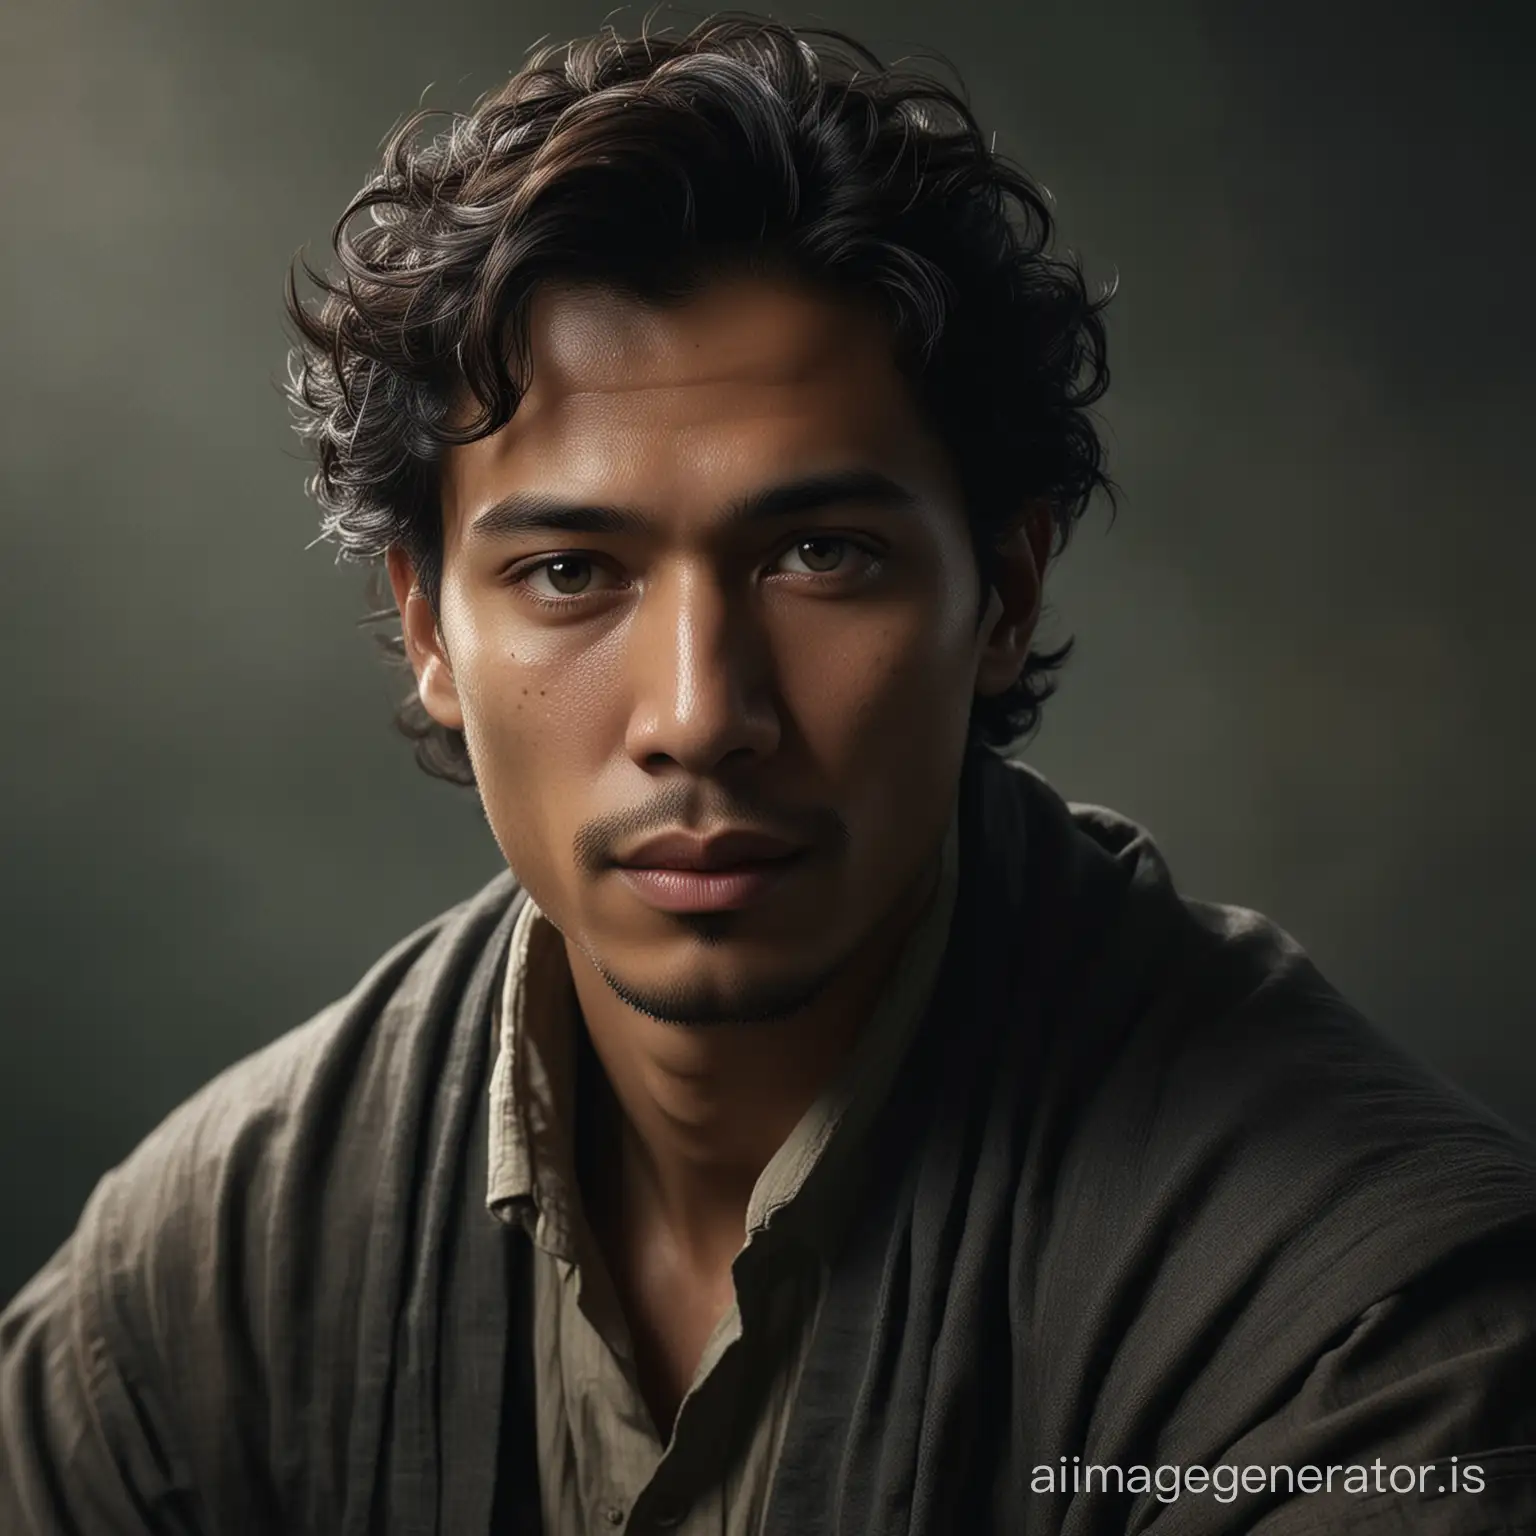 Indonesian-Man-Portrait-by-Annie-Leibovitz-HighQuality-Studio-Lighting-Photography-in-Rembrandt-and-Caravaggio-Style